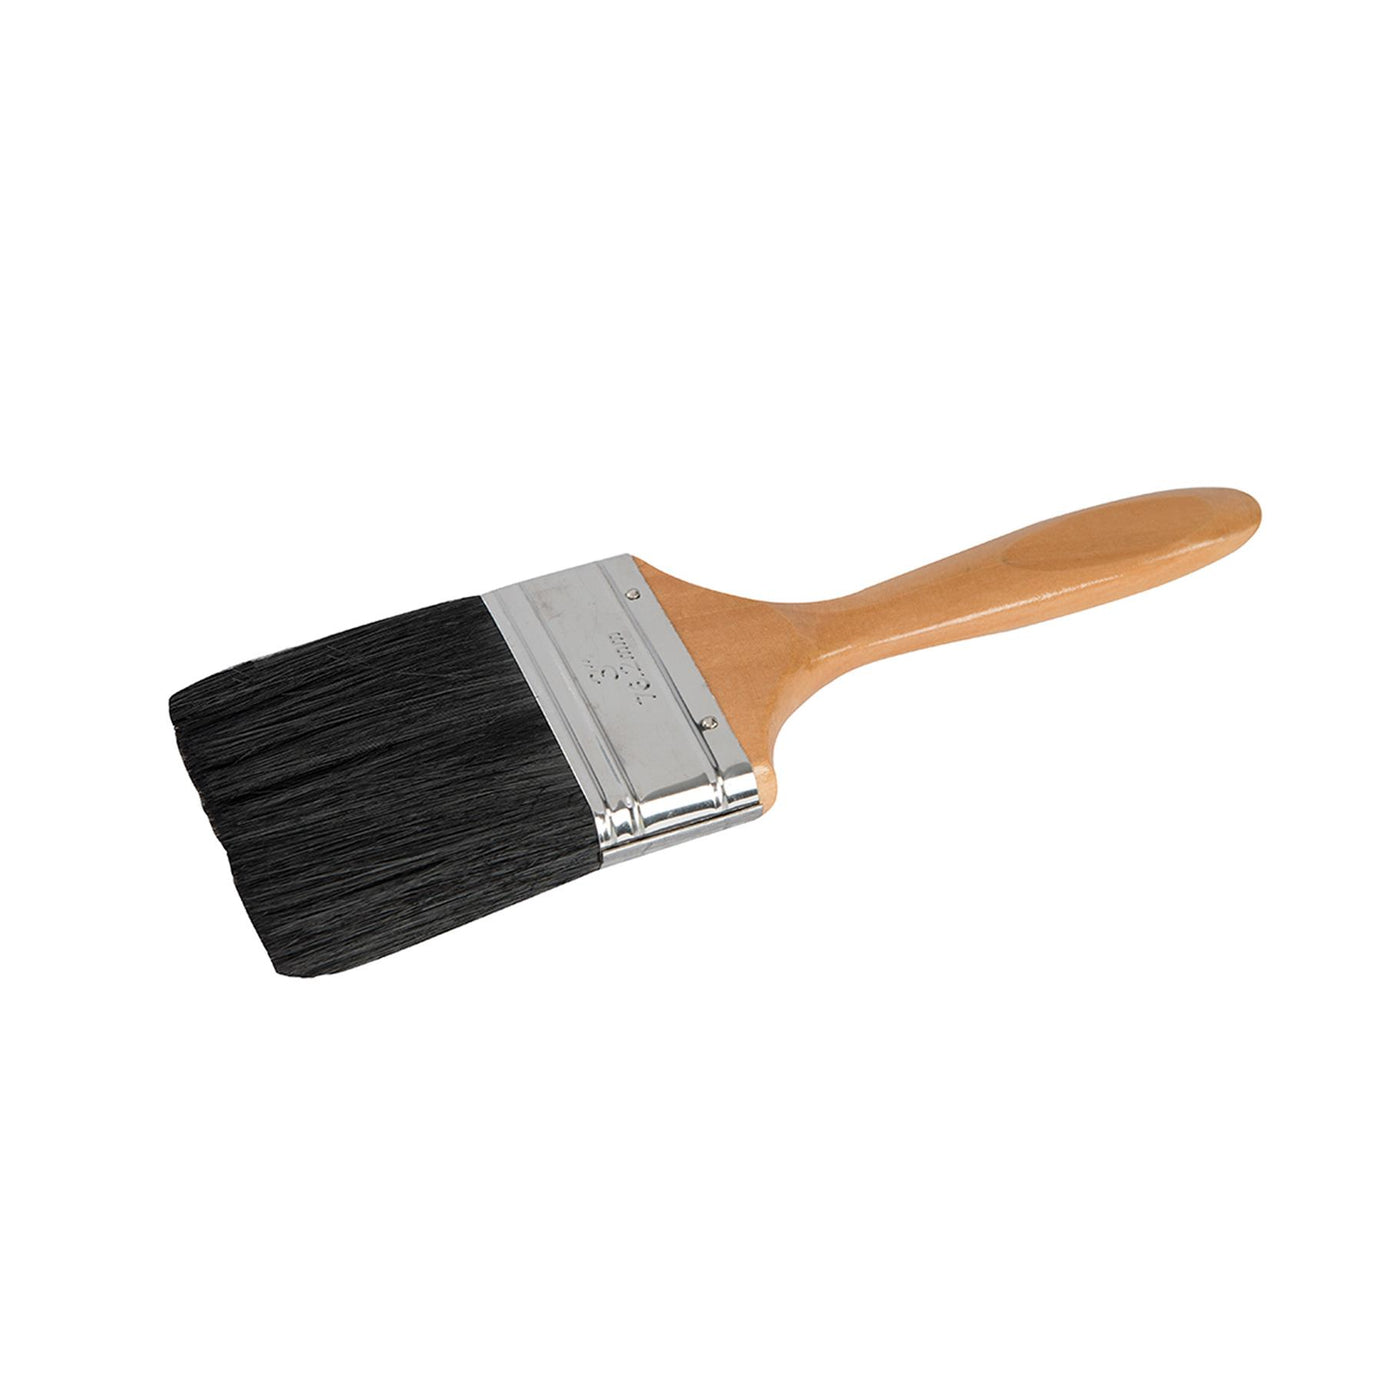 75mm Premium Paint Brush Decorating Painting With Water & Oil-Based Coatings